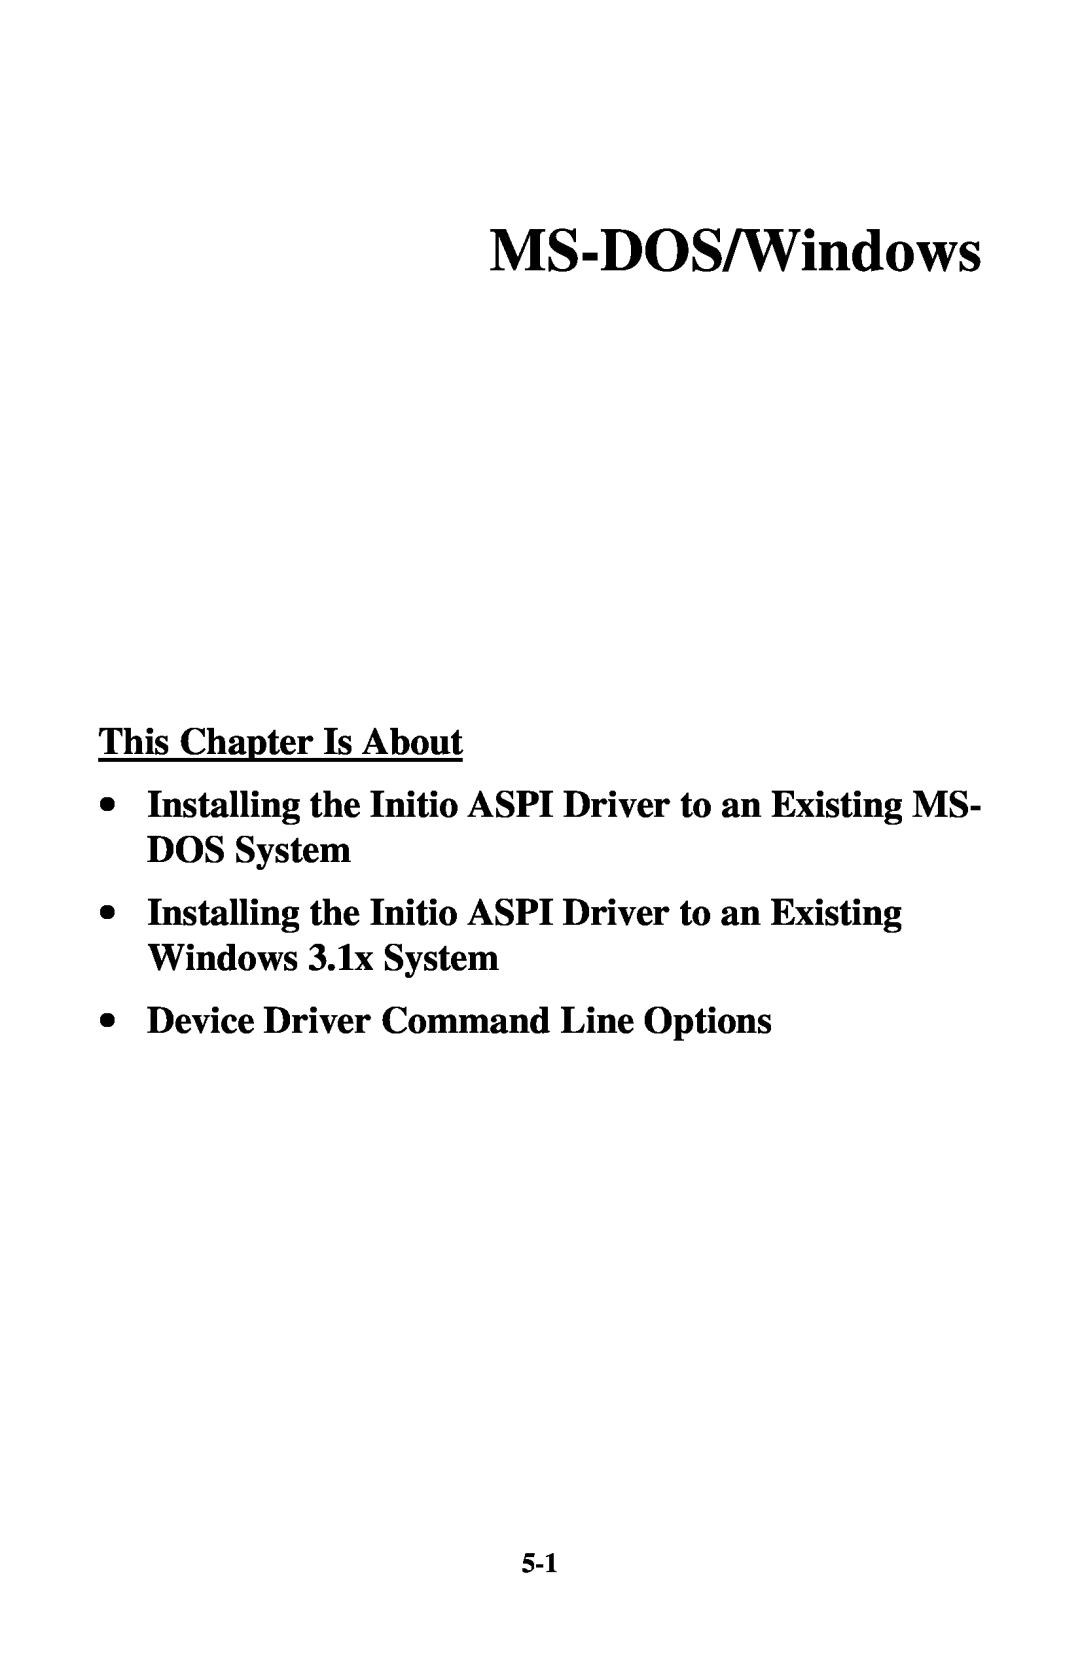 Initio INI-9100UW MS-DOS/Windows, This Chapter Is About, ∙ Installing the Initio ASPI Driver to an Existing MS- DOS System 